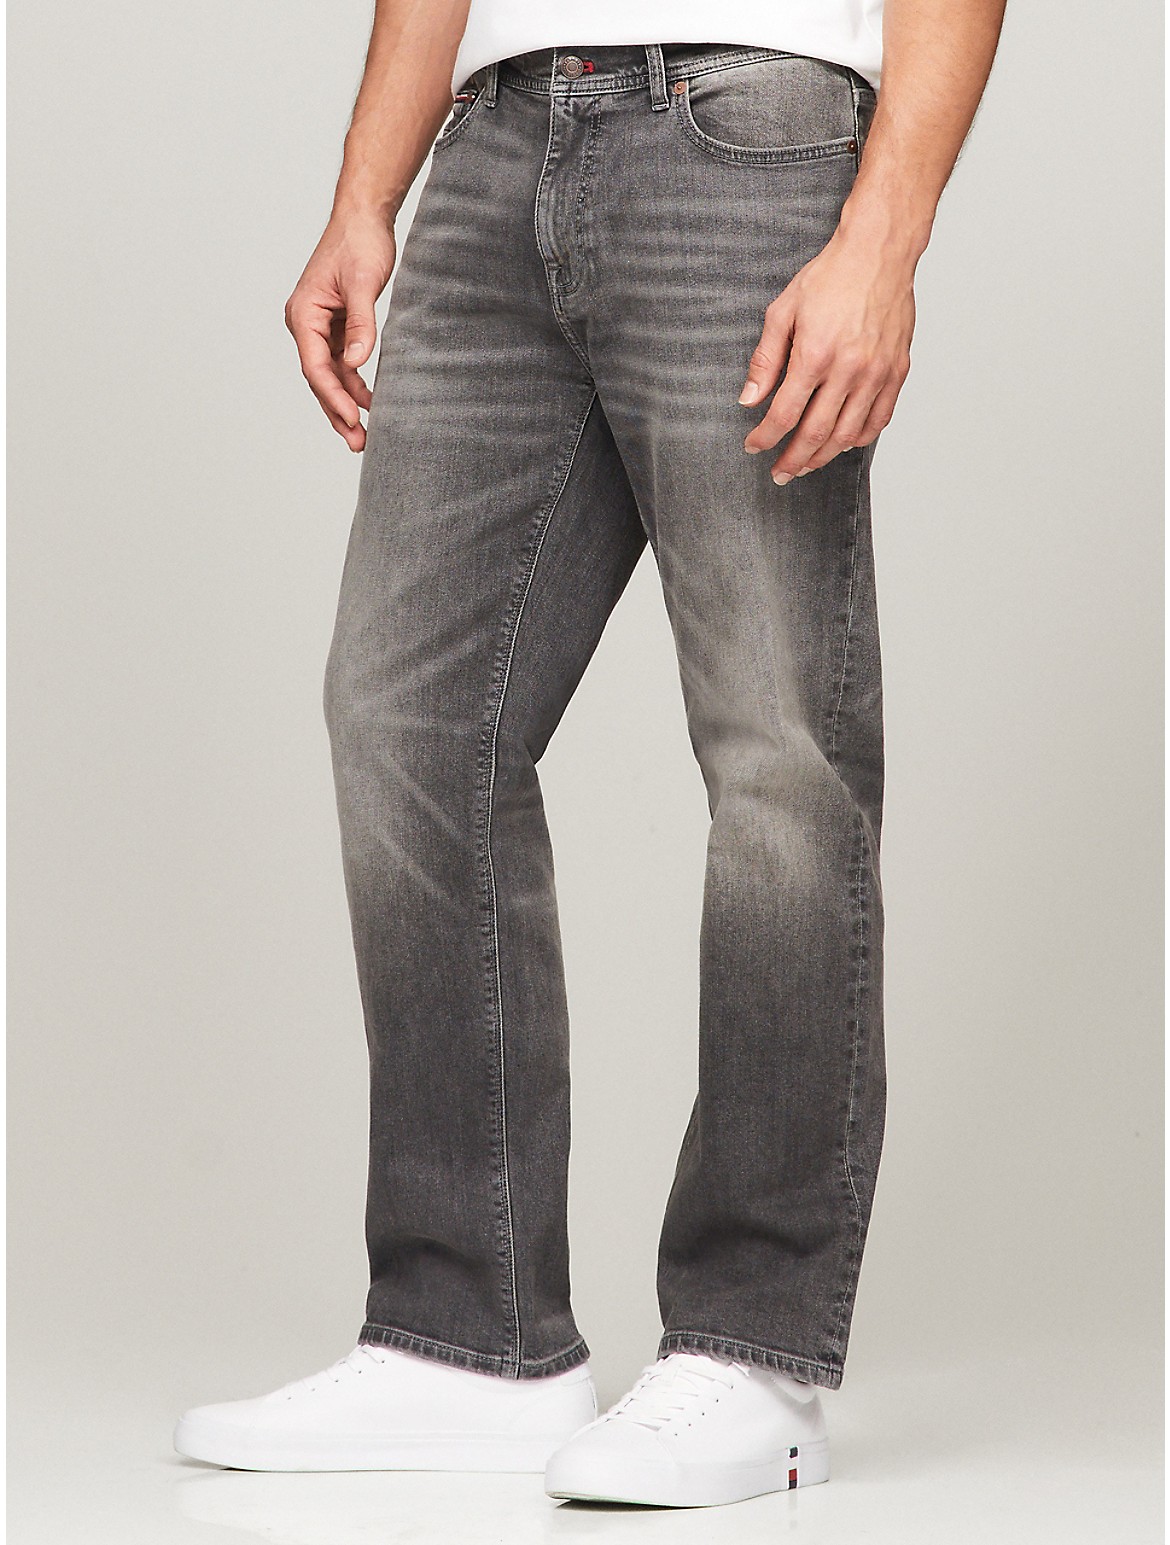 Tommy Hilfiger Men's Relaxed Straight Fit Gray Jean